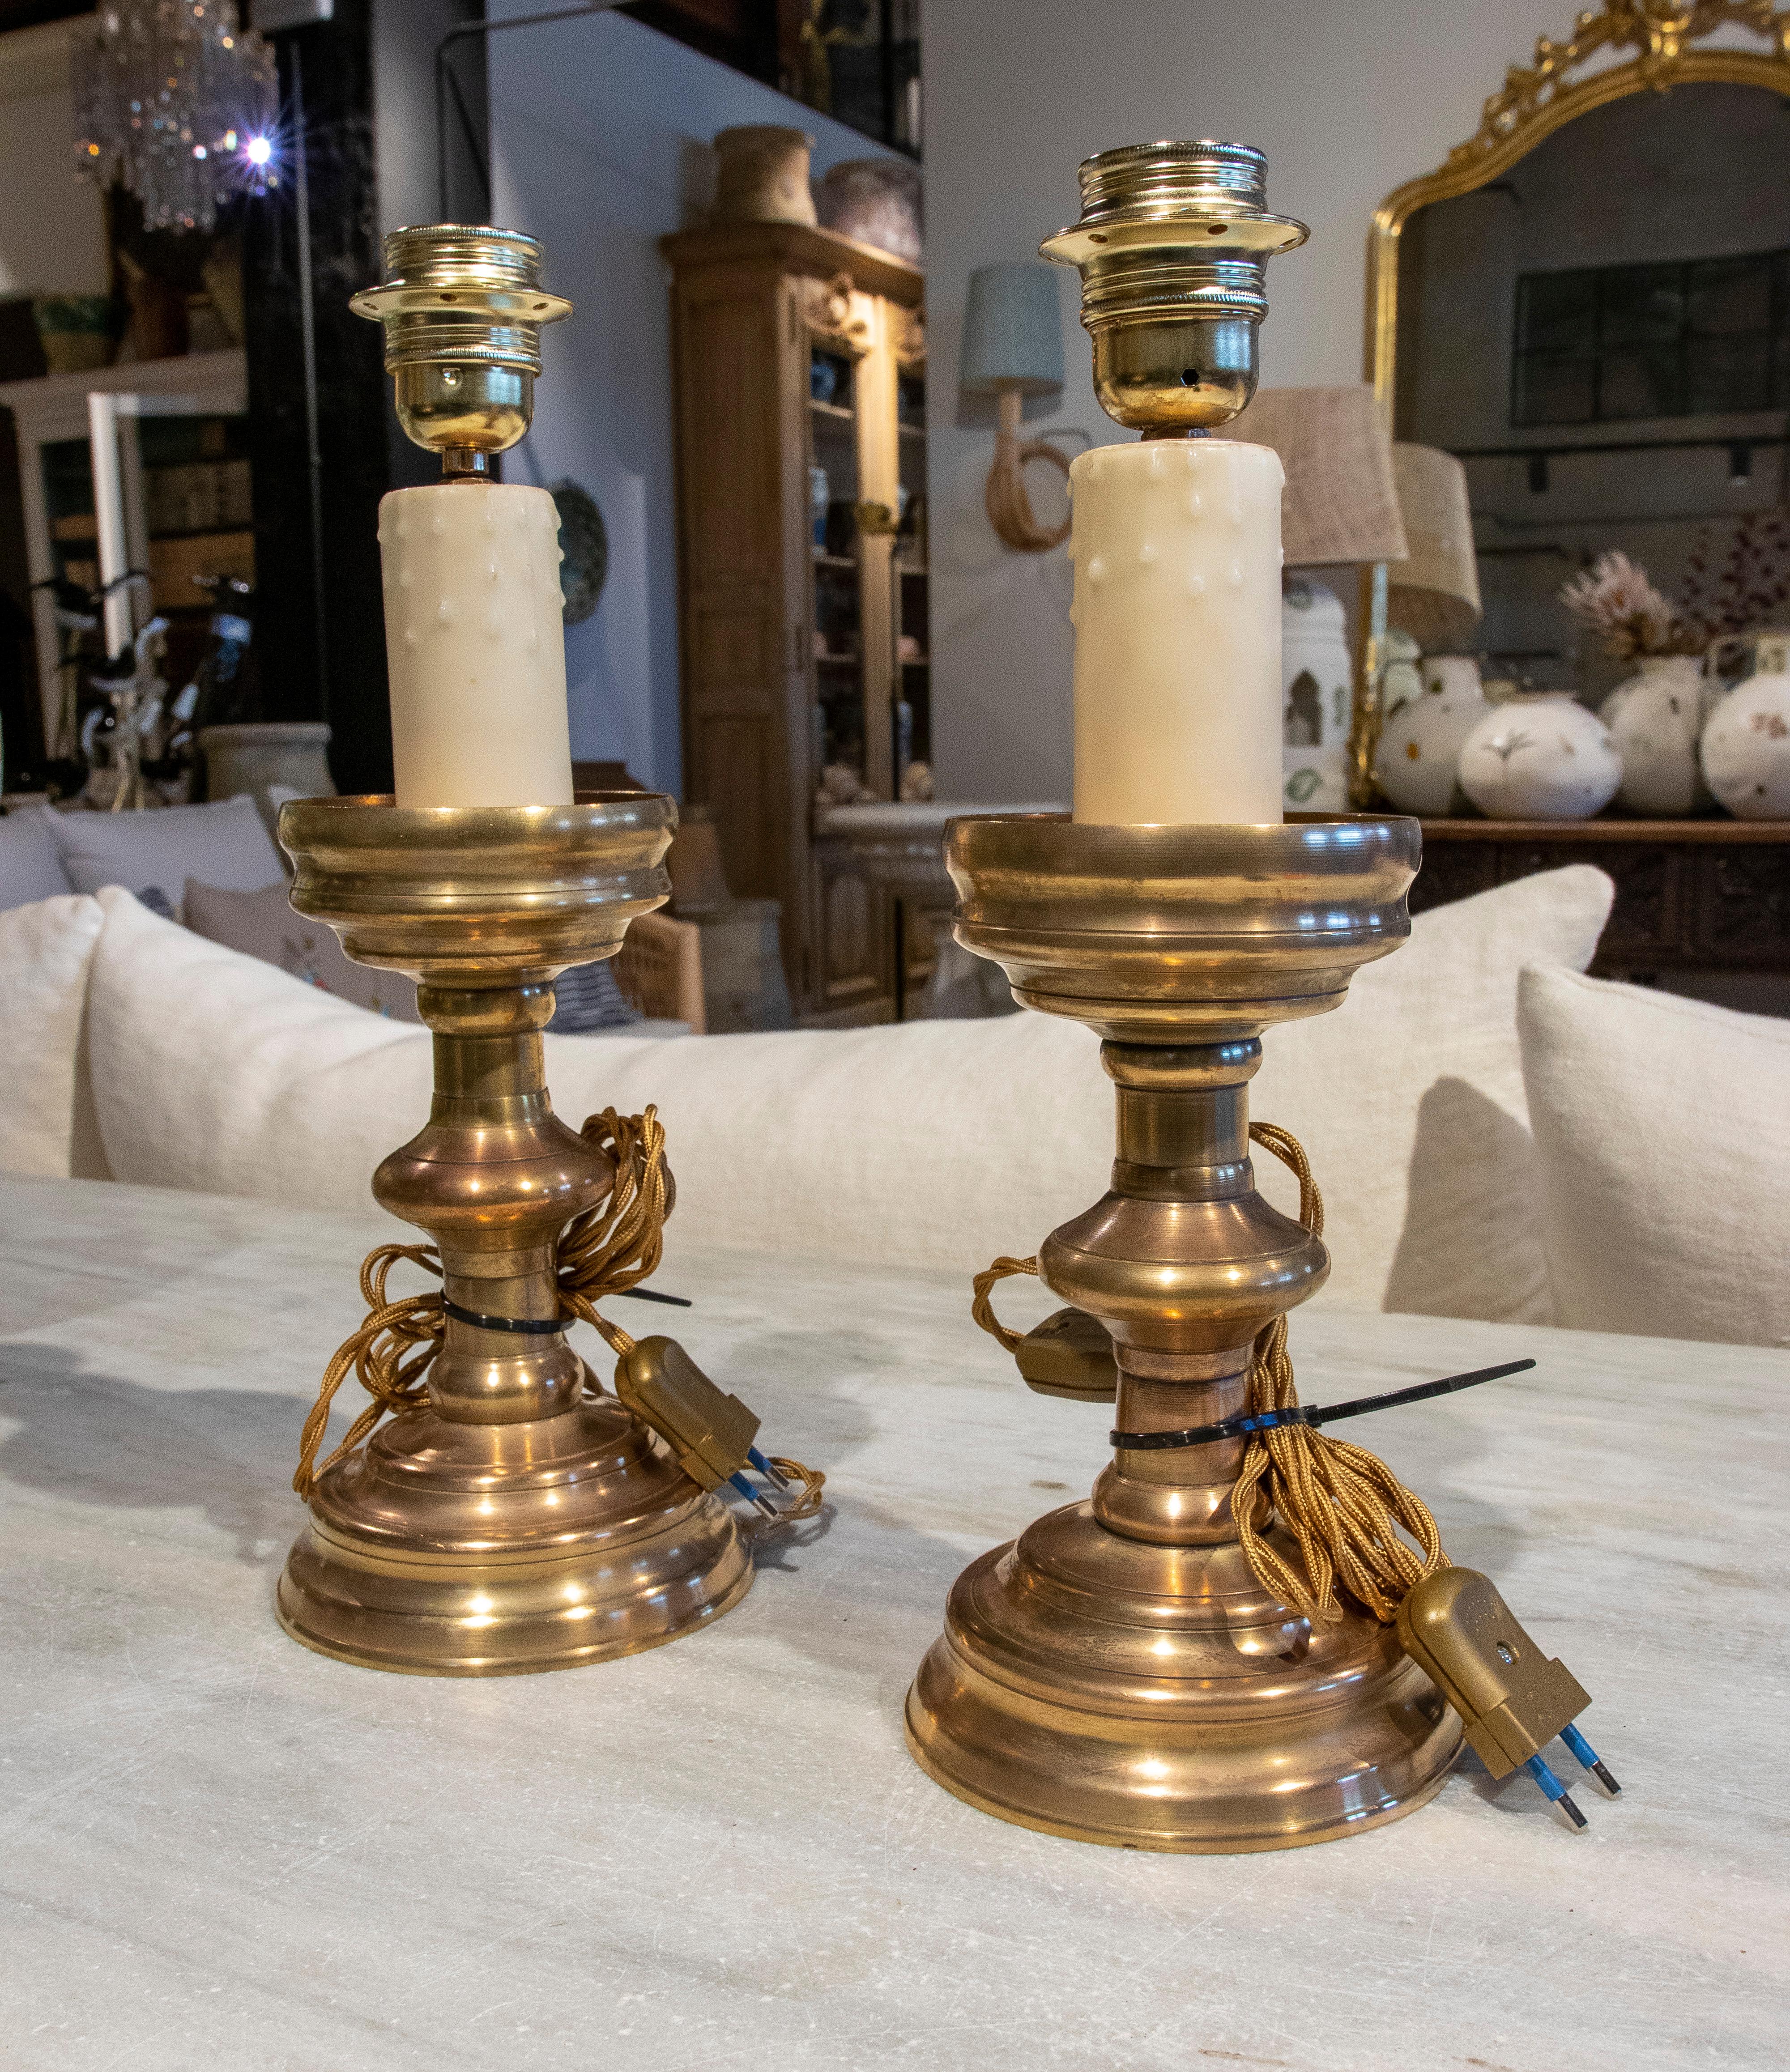 19th Century pair of lamps made with two bronze candlesticks.